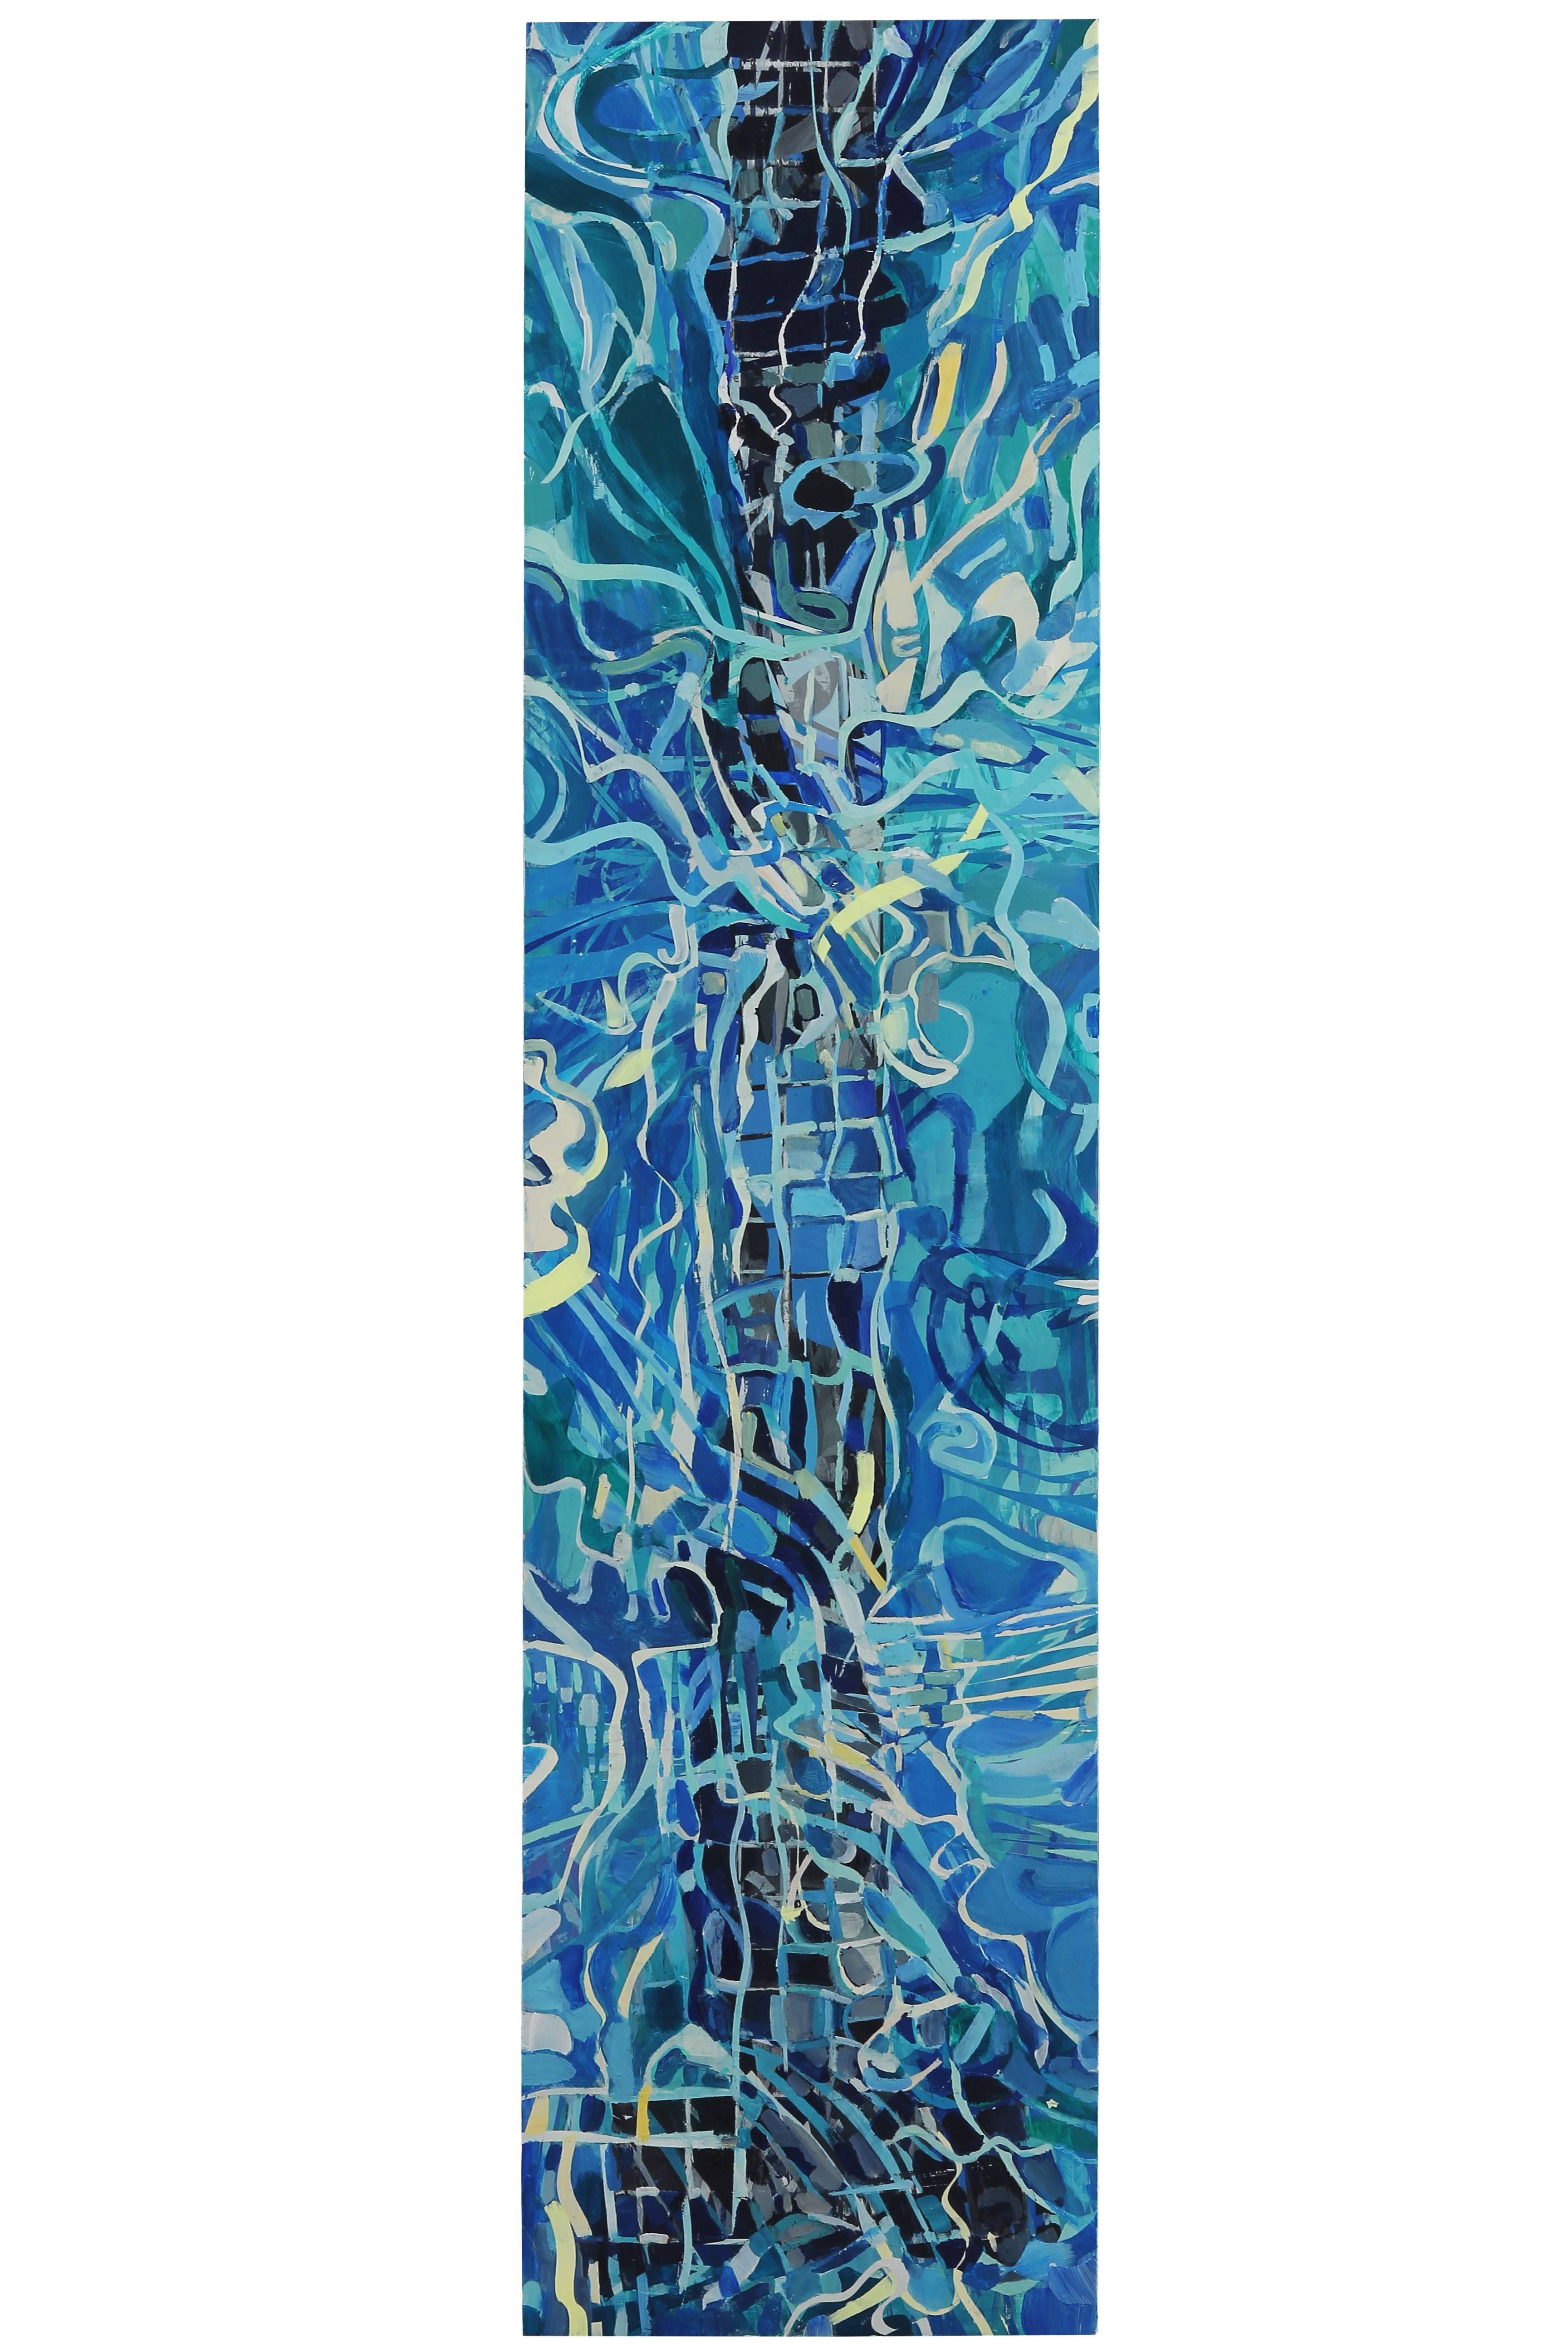 Pool Lanes:Turbulence I &II (12 x 96 inches) - Blue Abstract Painting by Kim Frohsin